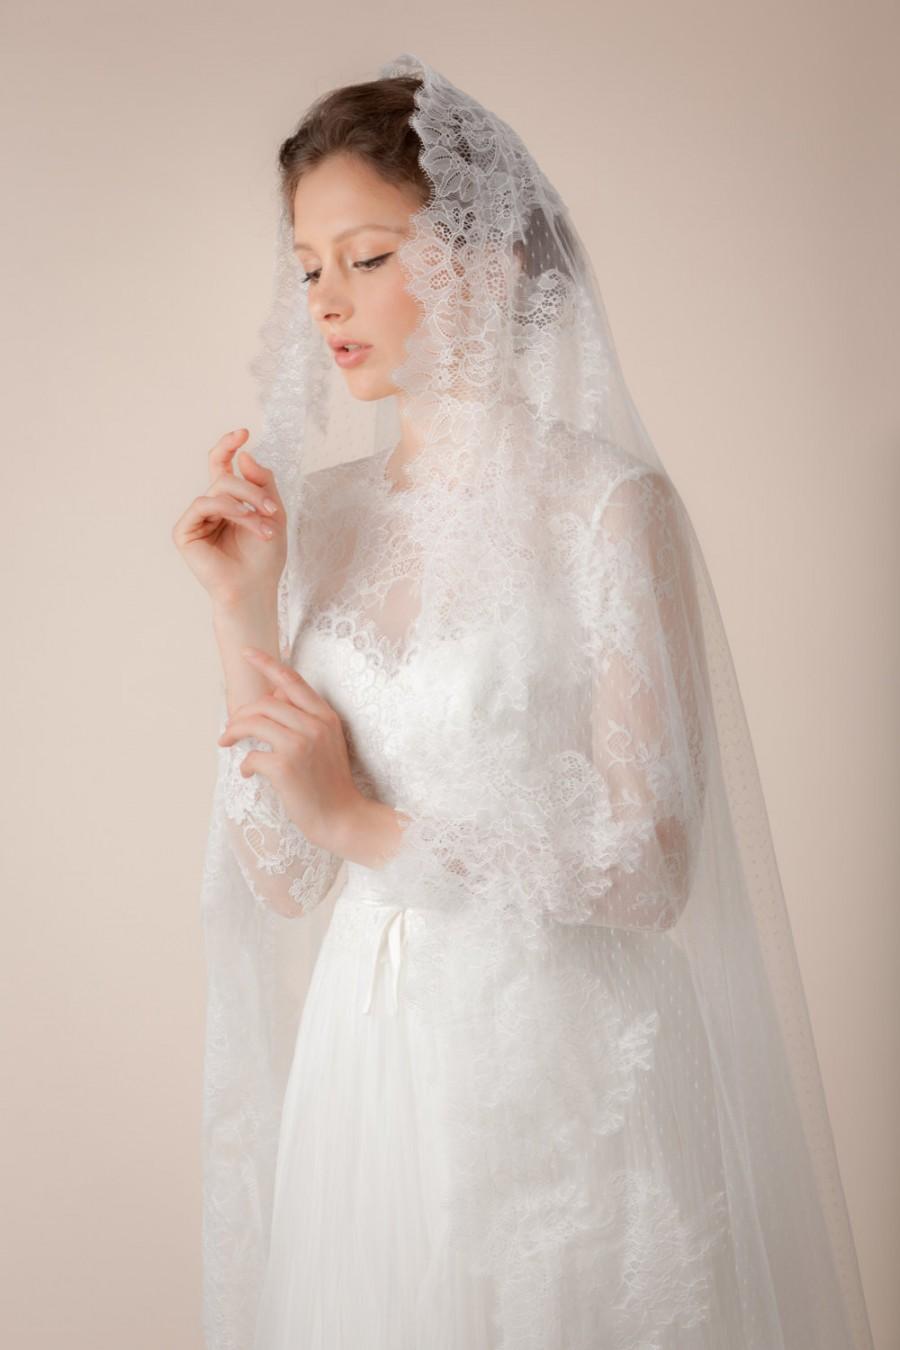 Mariage - Wedding veil, swiss dotted veil with Chantilly lace trims, Bridal Mantilla Veil -- Style 316